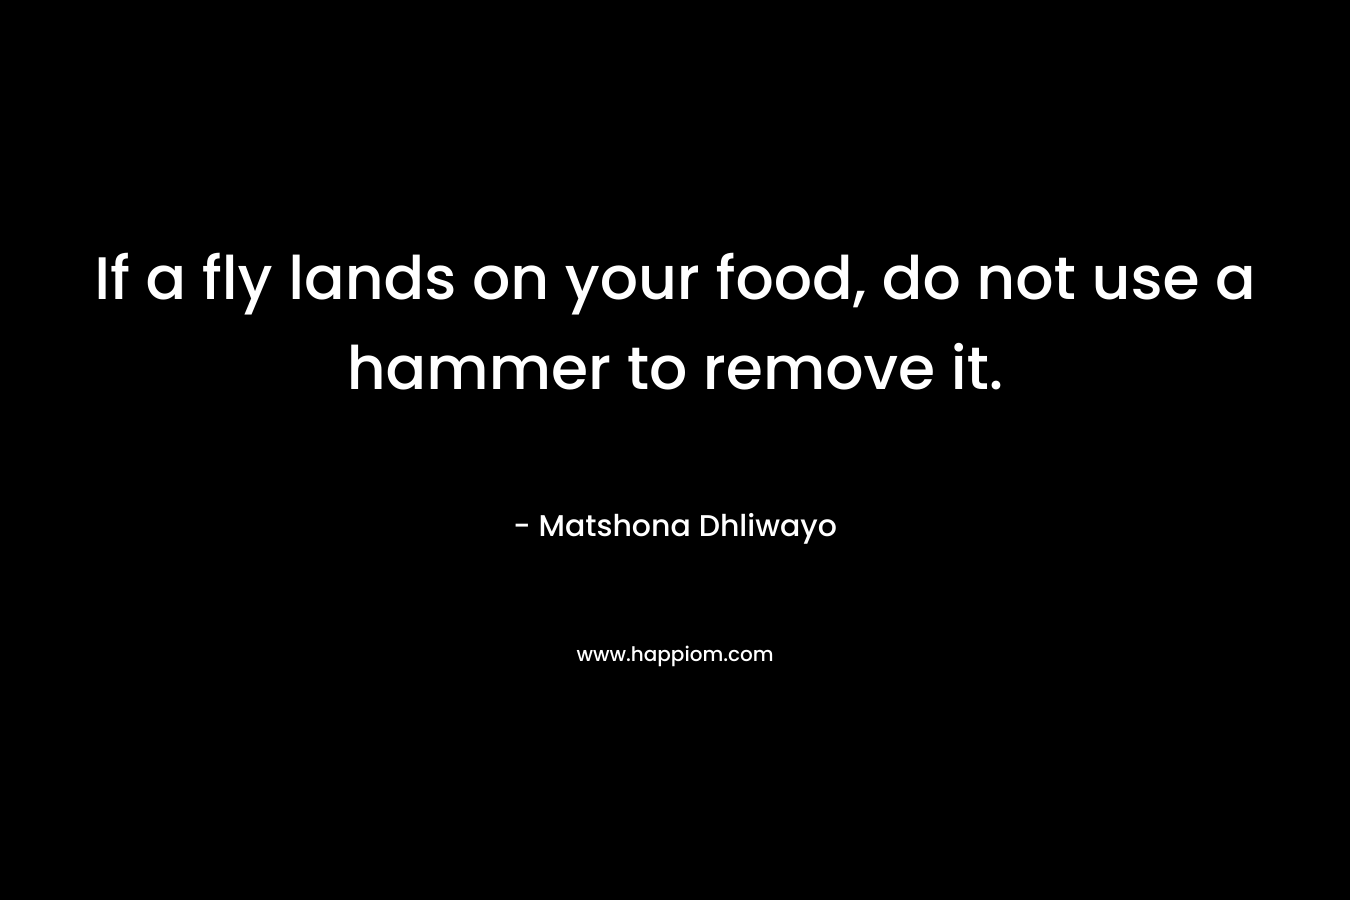 If a fly lands on your food, do not use a hammer to remove it.